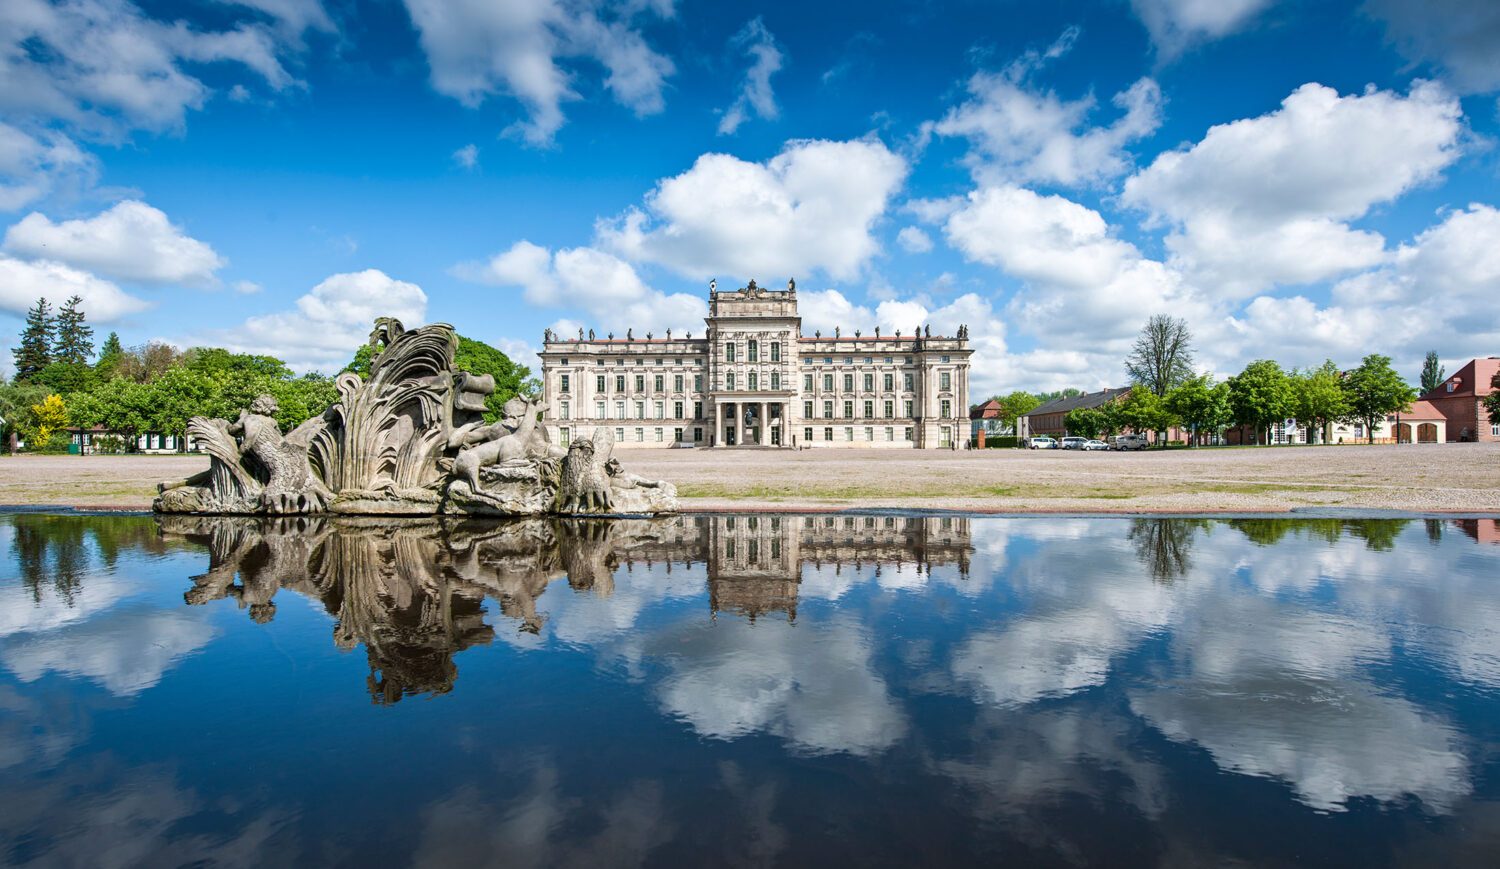 Ludwigslust Palace forms a spectacular architectural ensemble with the surrounding palace garden and its water features